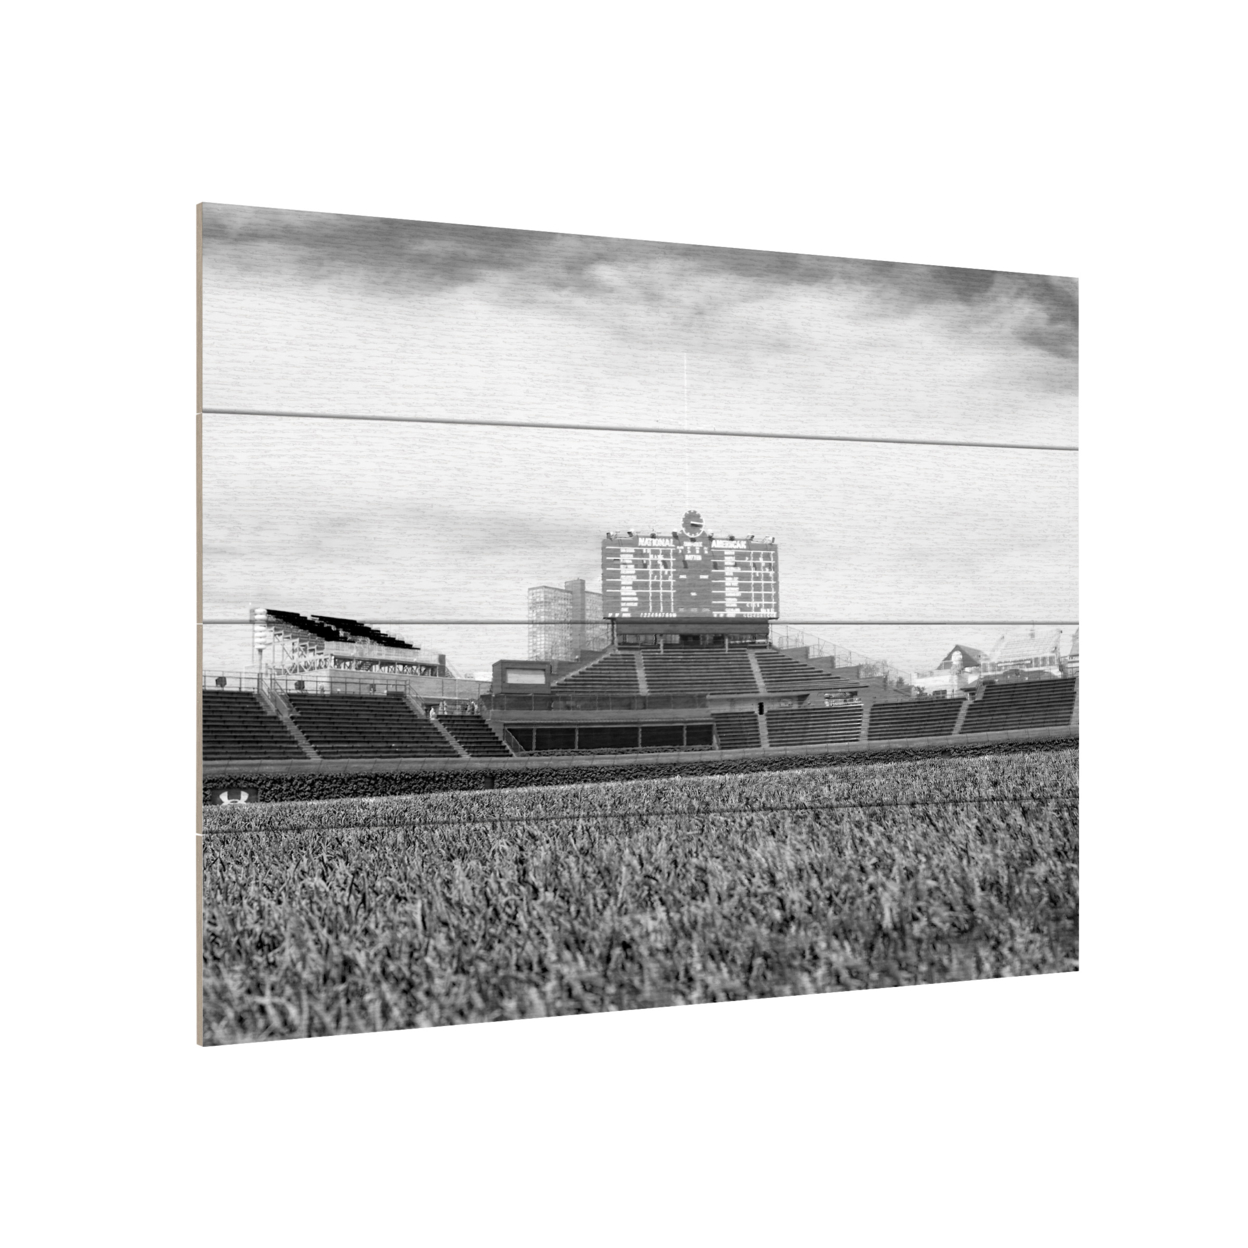 Wall Art 12 X 16 Inches Titled Wrigley Ready To Hang Printed On Wooden Planks